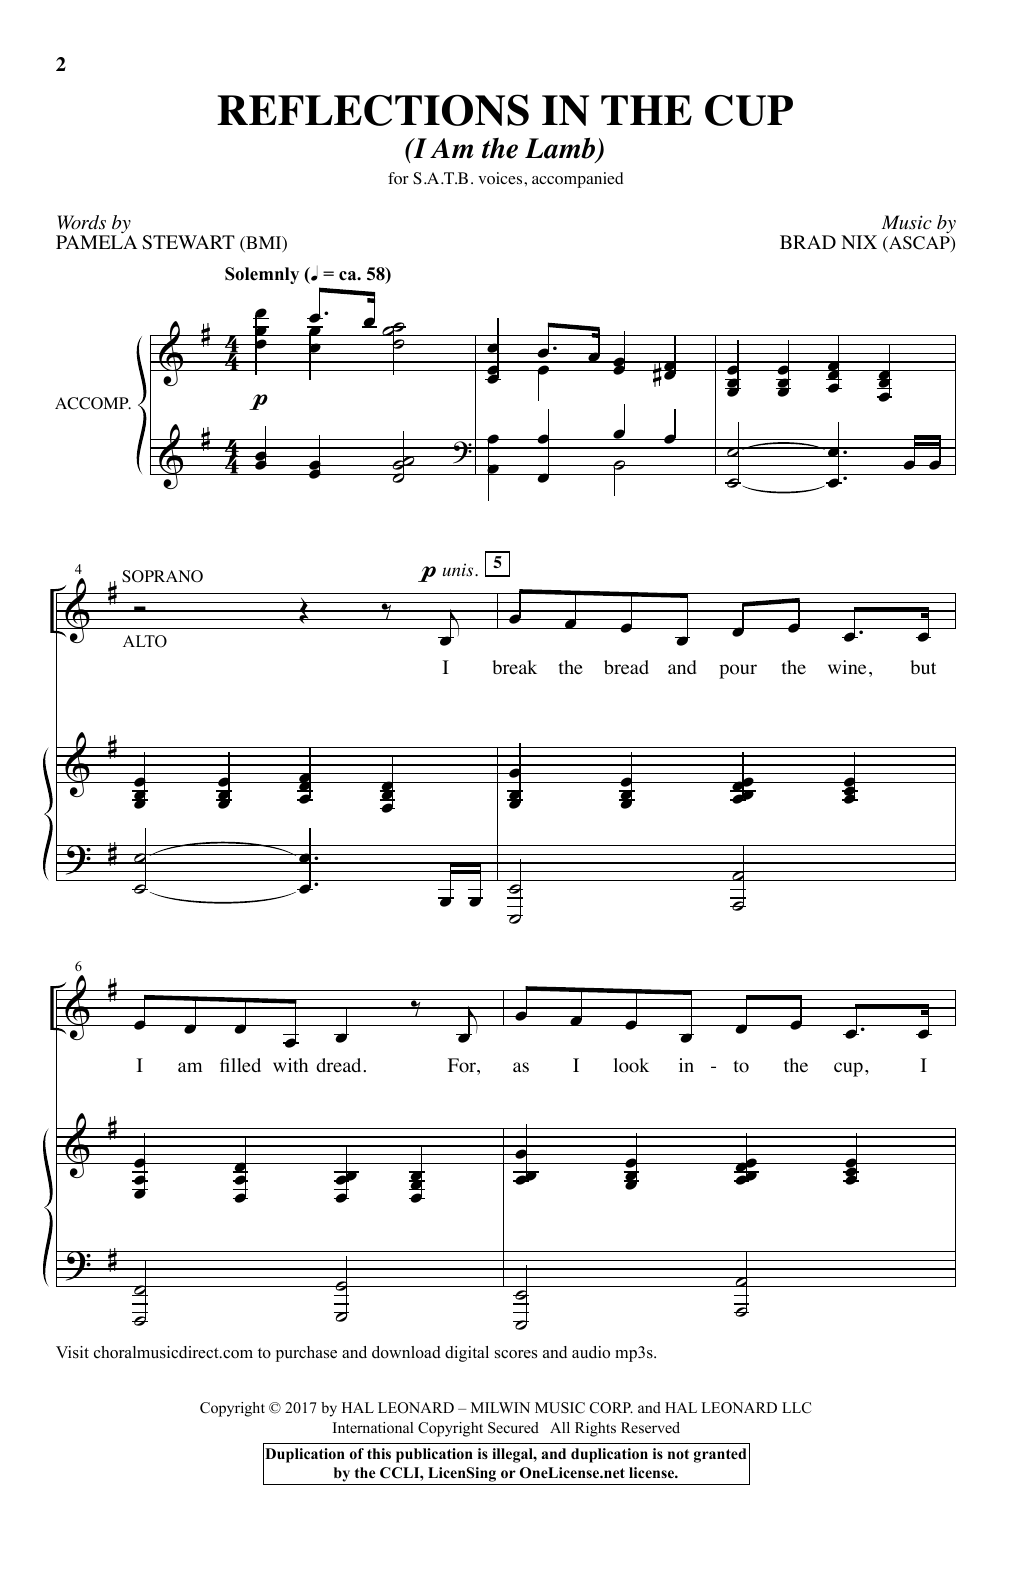 Download Brad Nix Reflections In The Cup (I Am The Lamb) Sheet Music